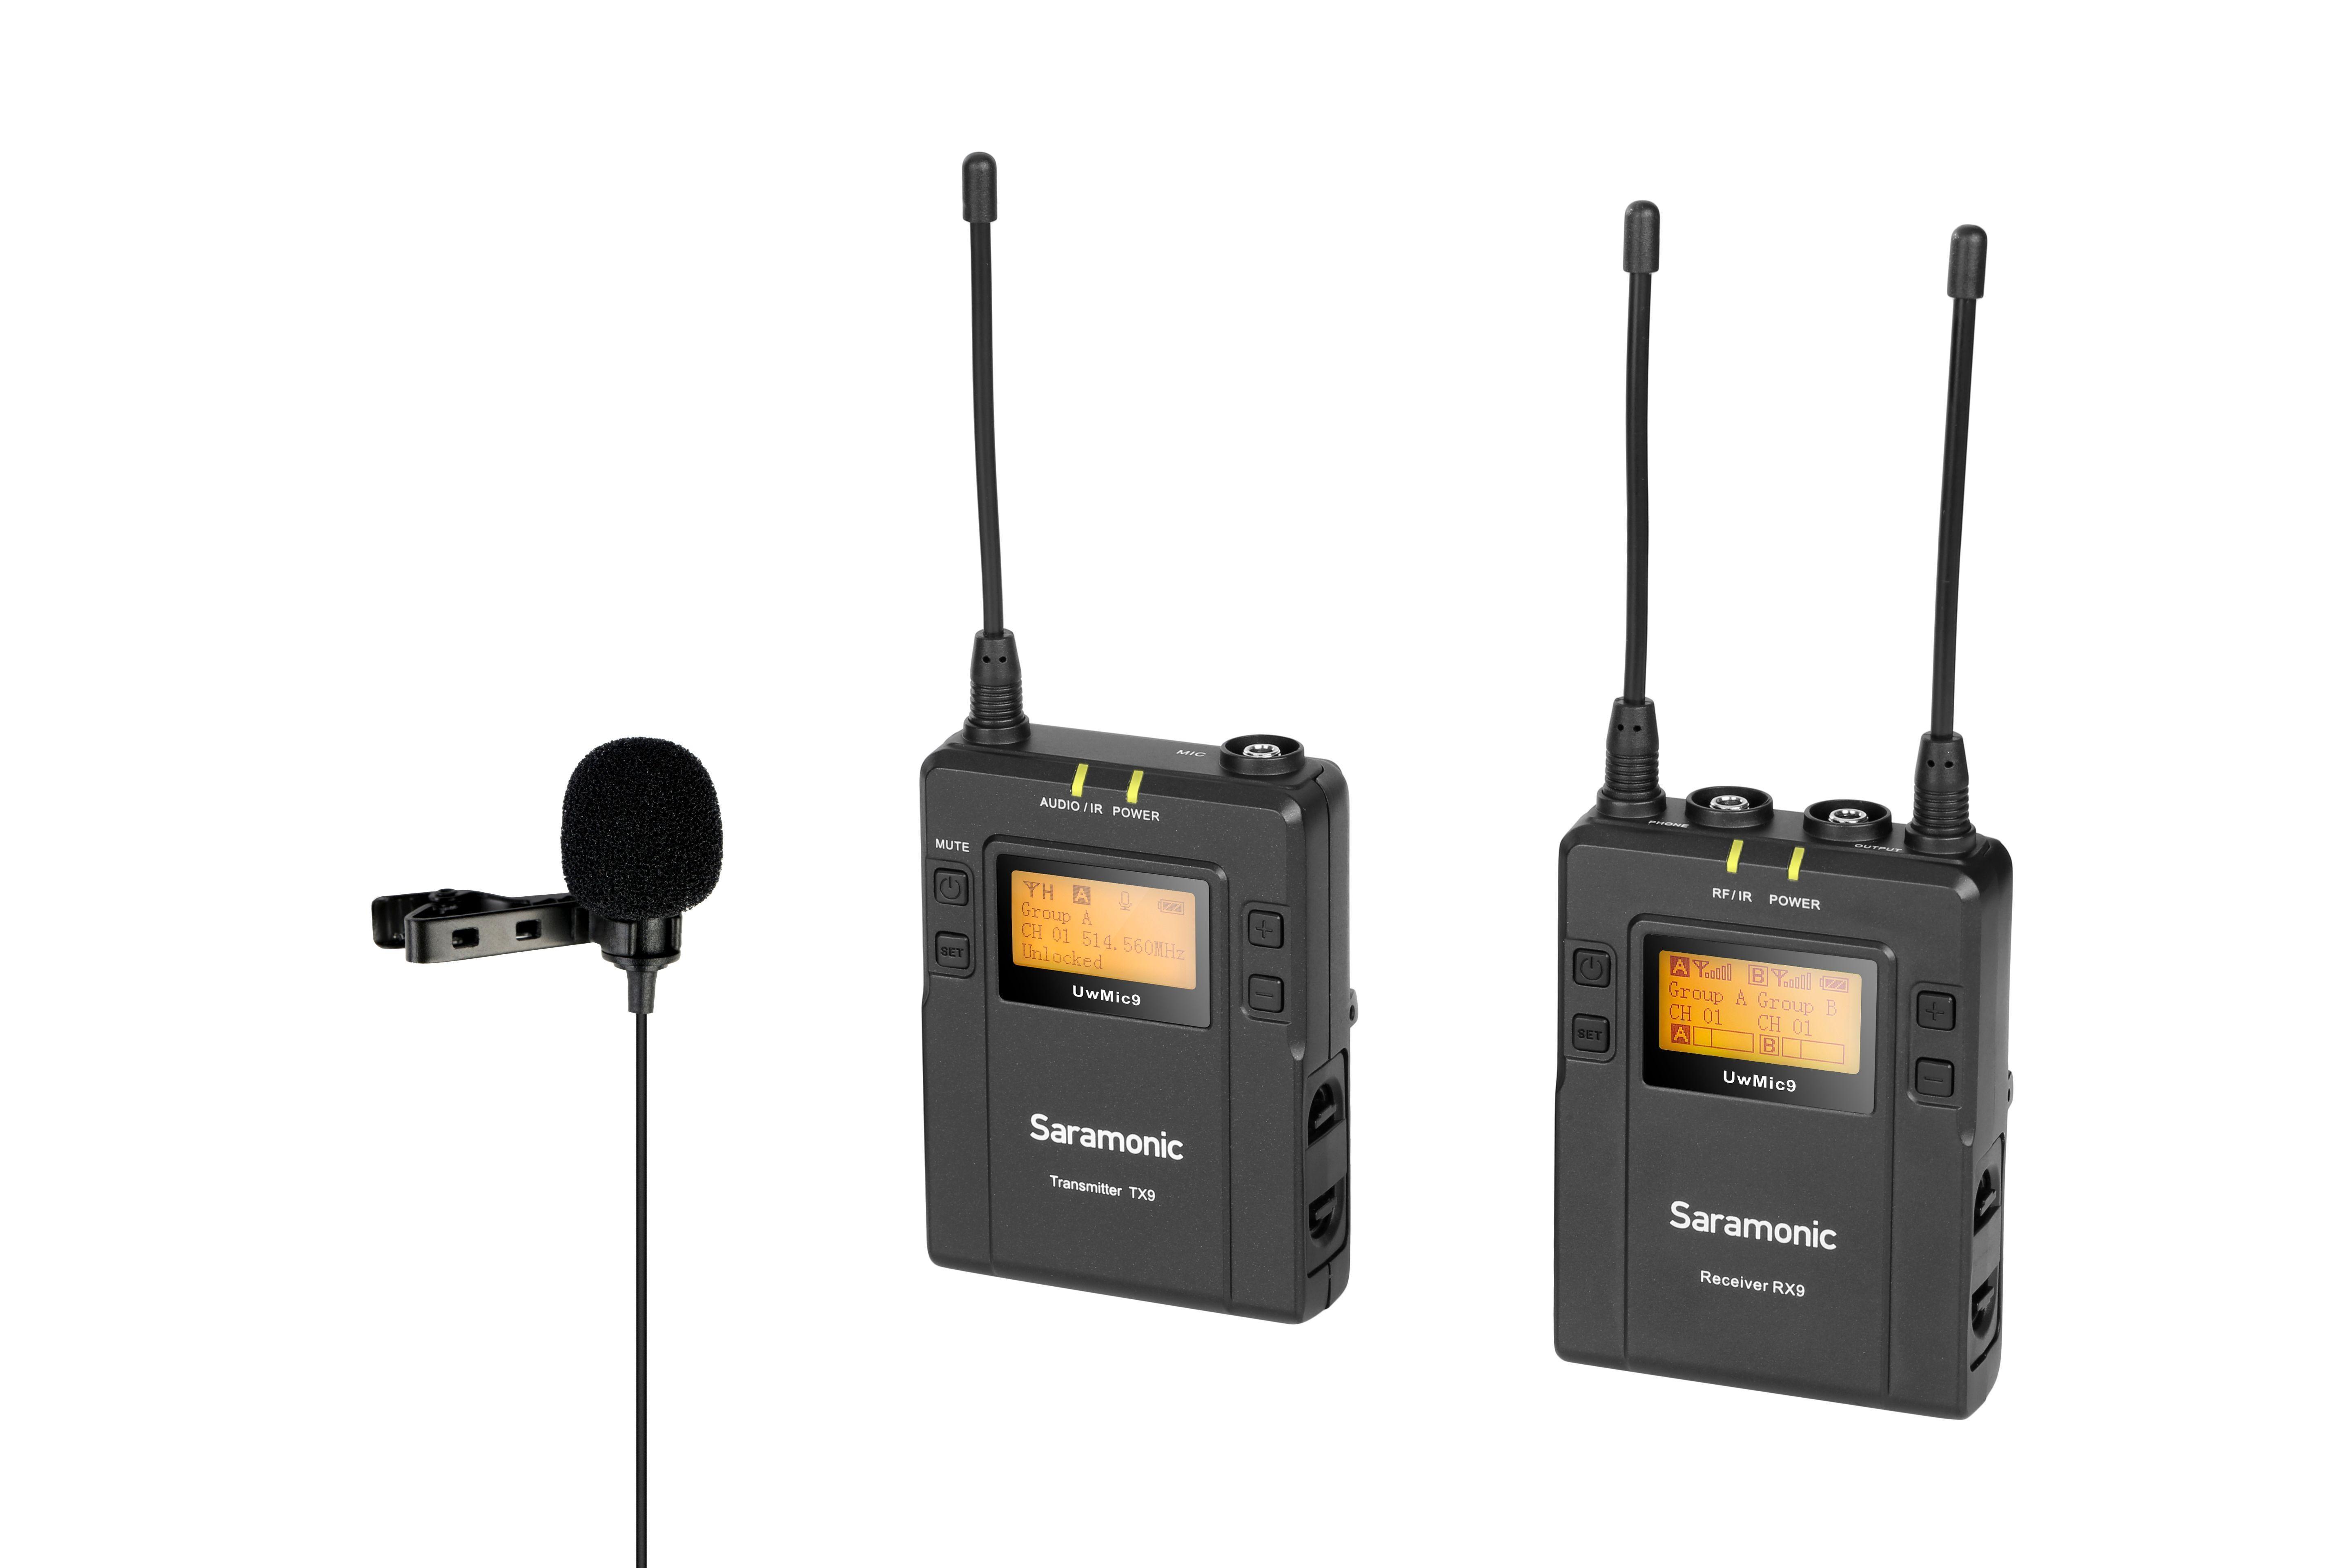 SARAMONIC UWMIC9-Kit1- RX9+TX9 2 PERSON WIRELESS LAVALIER MICROPHONE SYSTEM WITH PORTABLE DUAL-CHANNEL CAMERA-MOUNTABLE RECEIVER